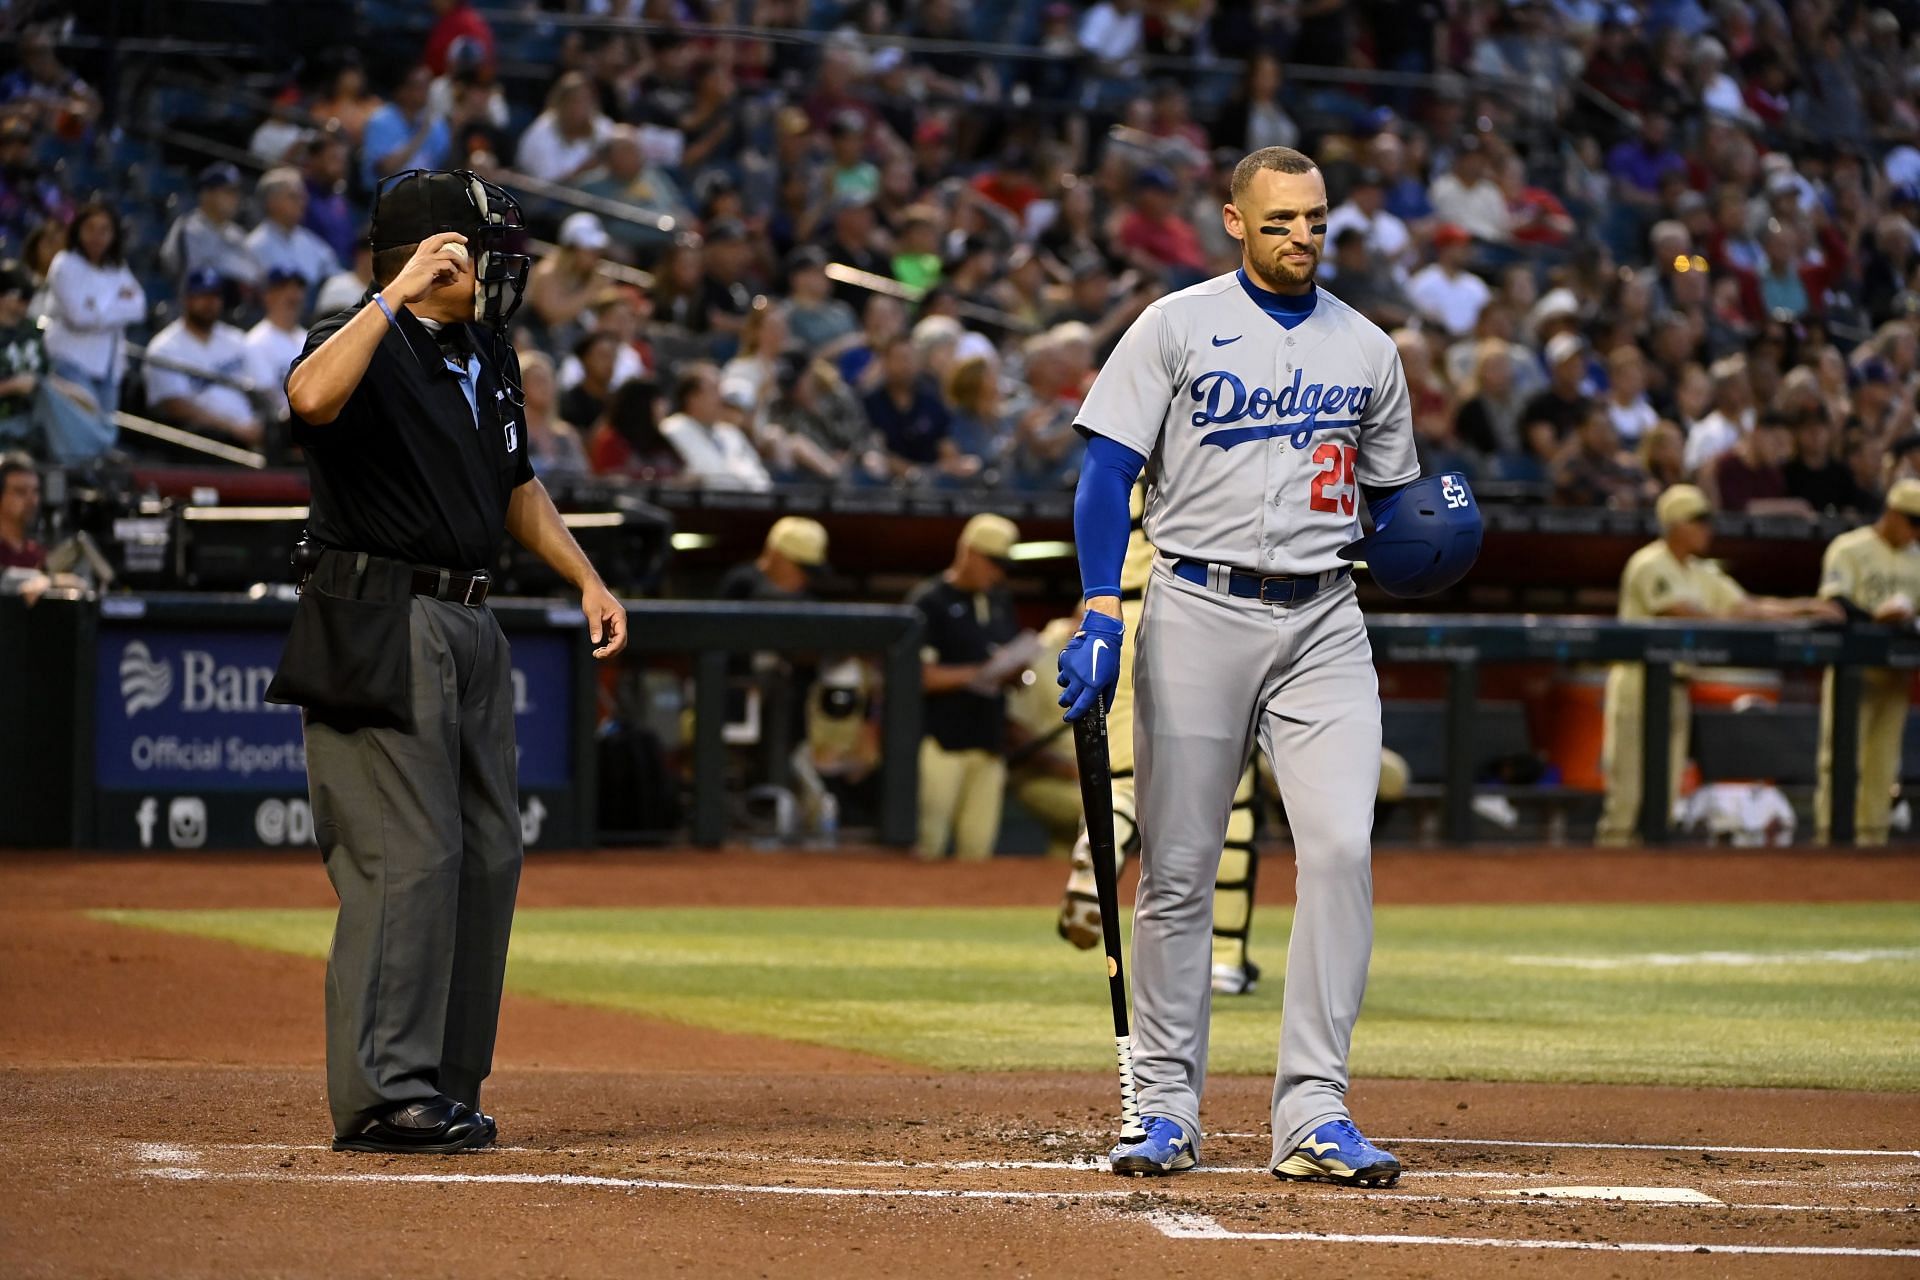 Watch Dodgers Outfielder Trayce Thompson Put on a Show Against